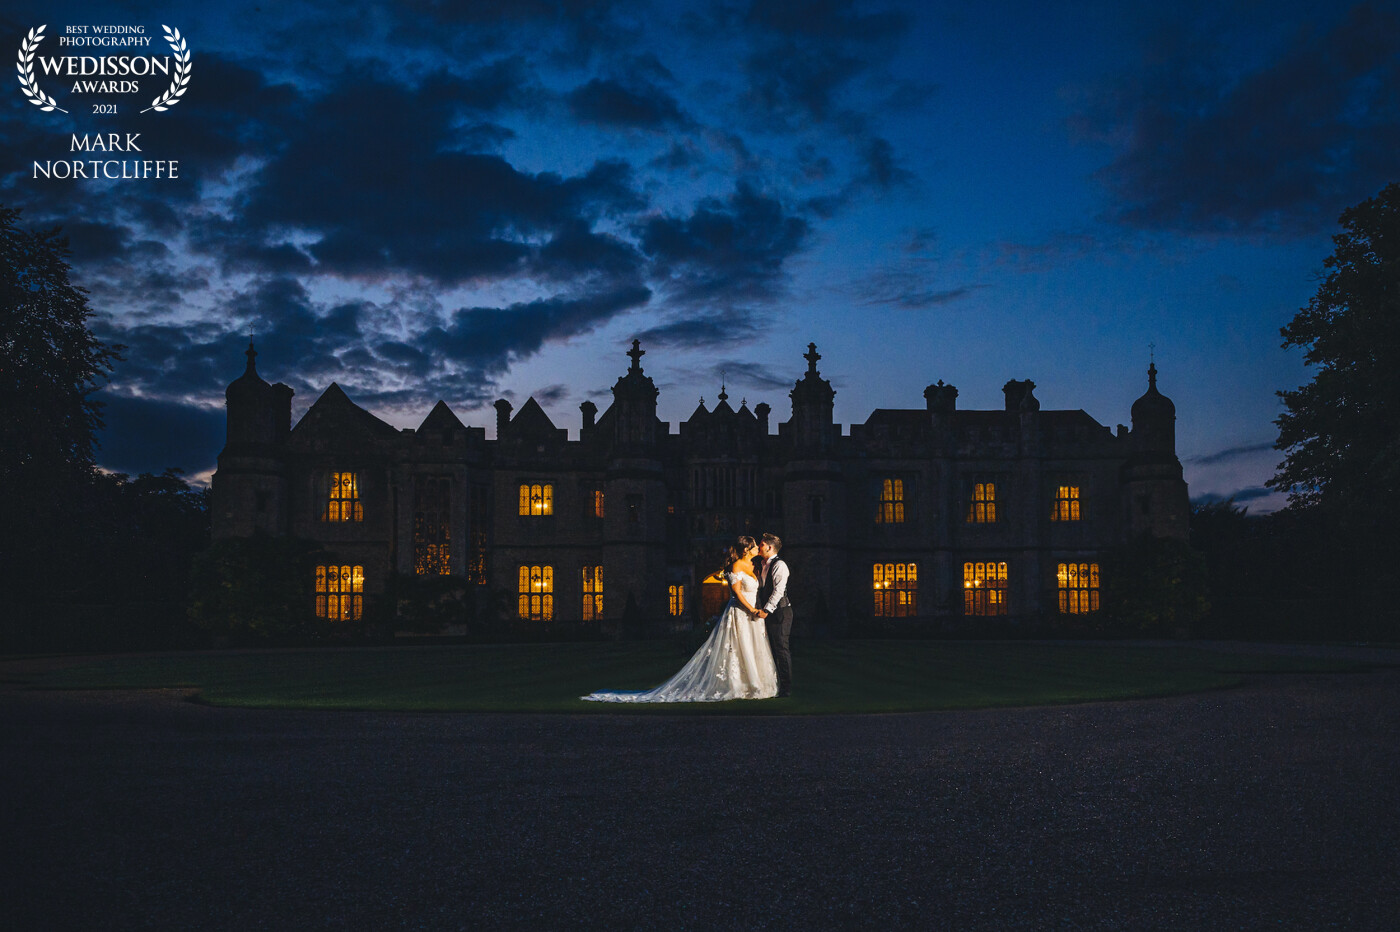 One of the last photographs taken outside on the day of Bethany and Jack's amazing wedding at Hengrave Hall before we headed inside to finish the night off in true style. Congratulations guys for having me along for the day. I had spotted this backdrop previously knowing it would be stunning when lit up at night. Such an amazing venue.